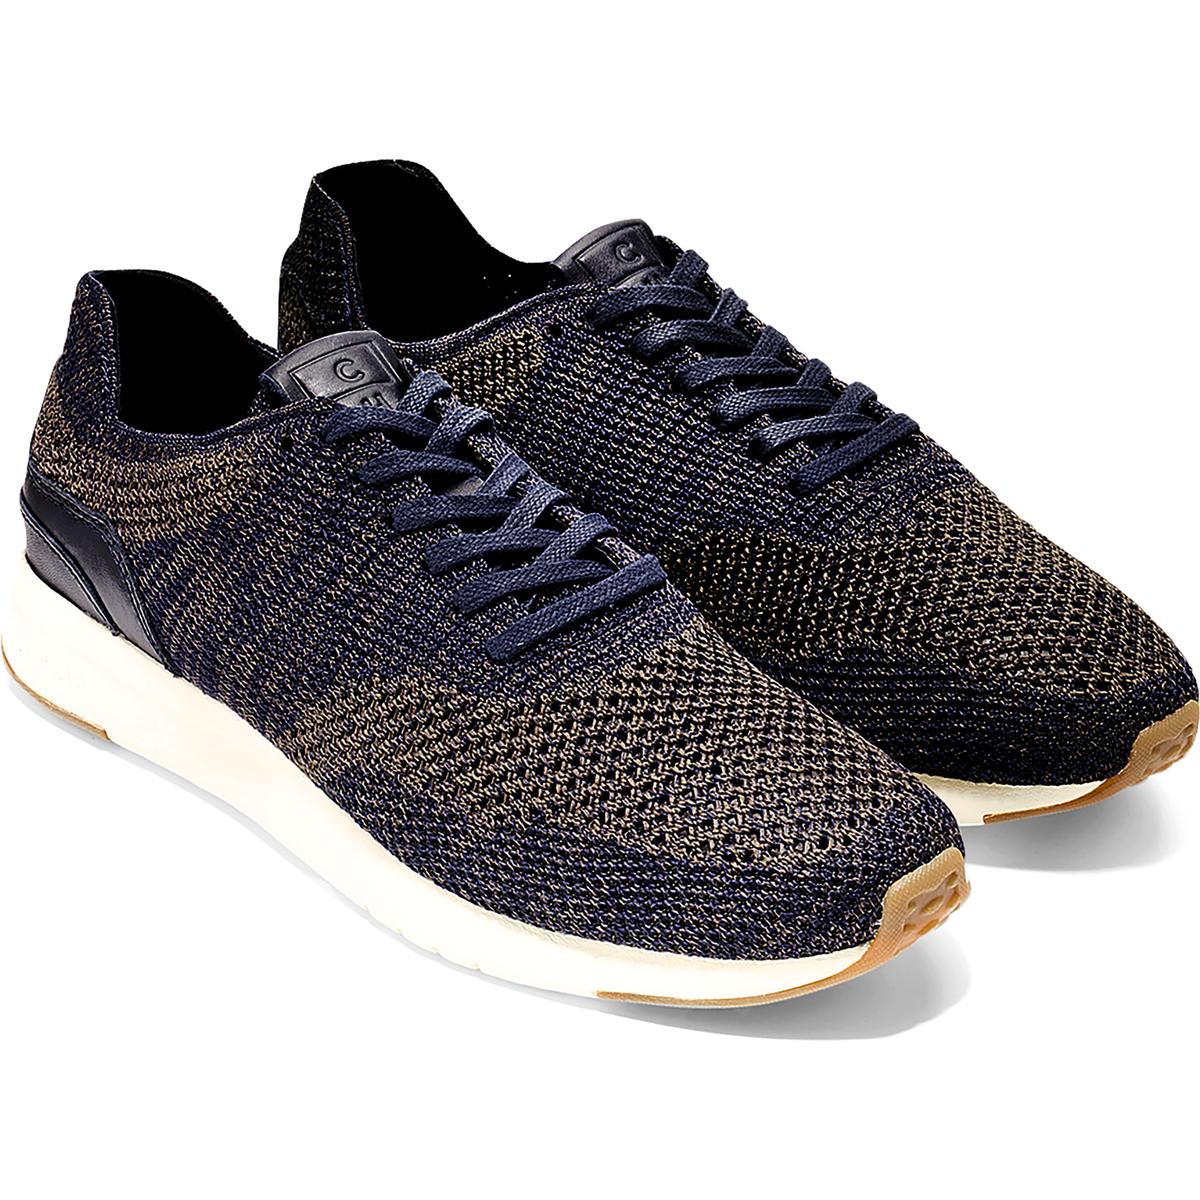 Cole Haan Mens Grandpro Runner Stitchlite Leather Perforated Running ...